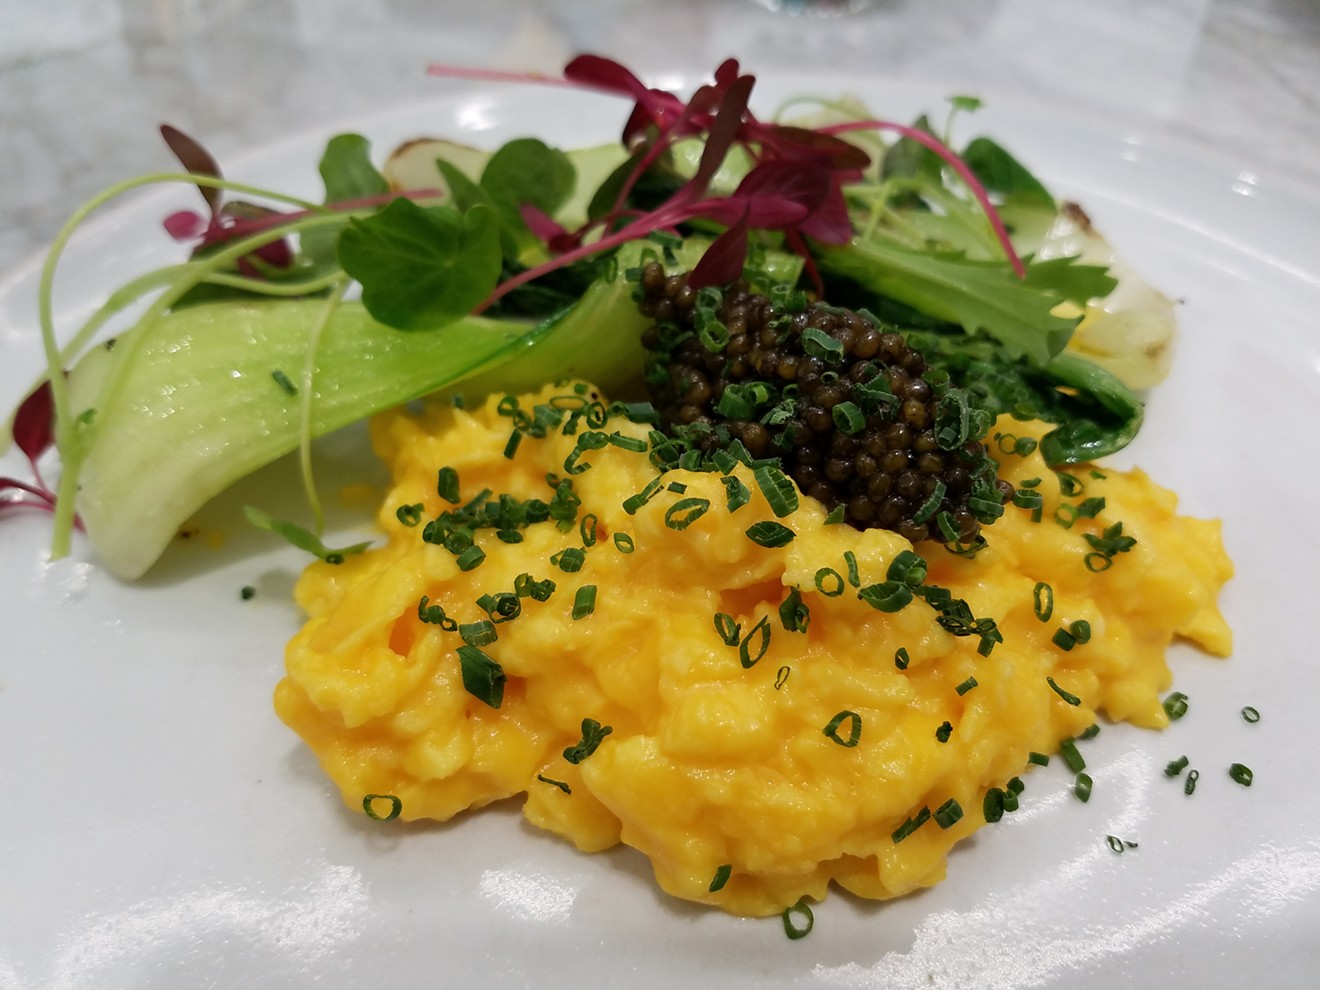 Salty pebbles of caviar beautifully offset a perfectly soft, silky French-style scramble ($24).